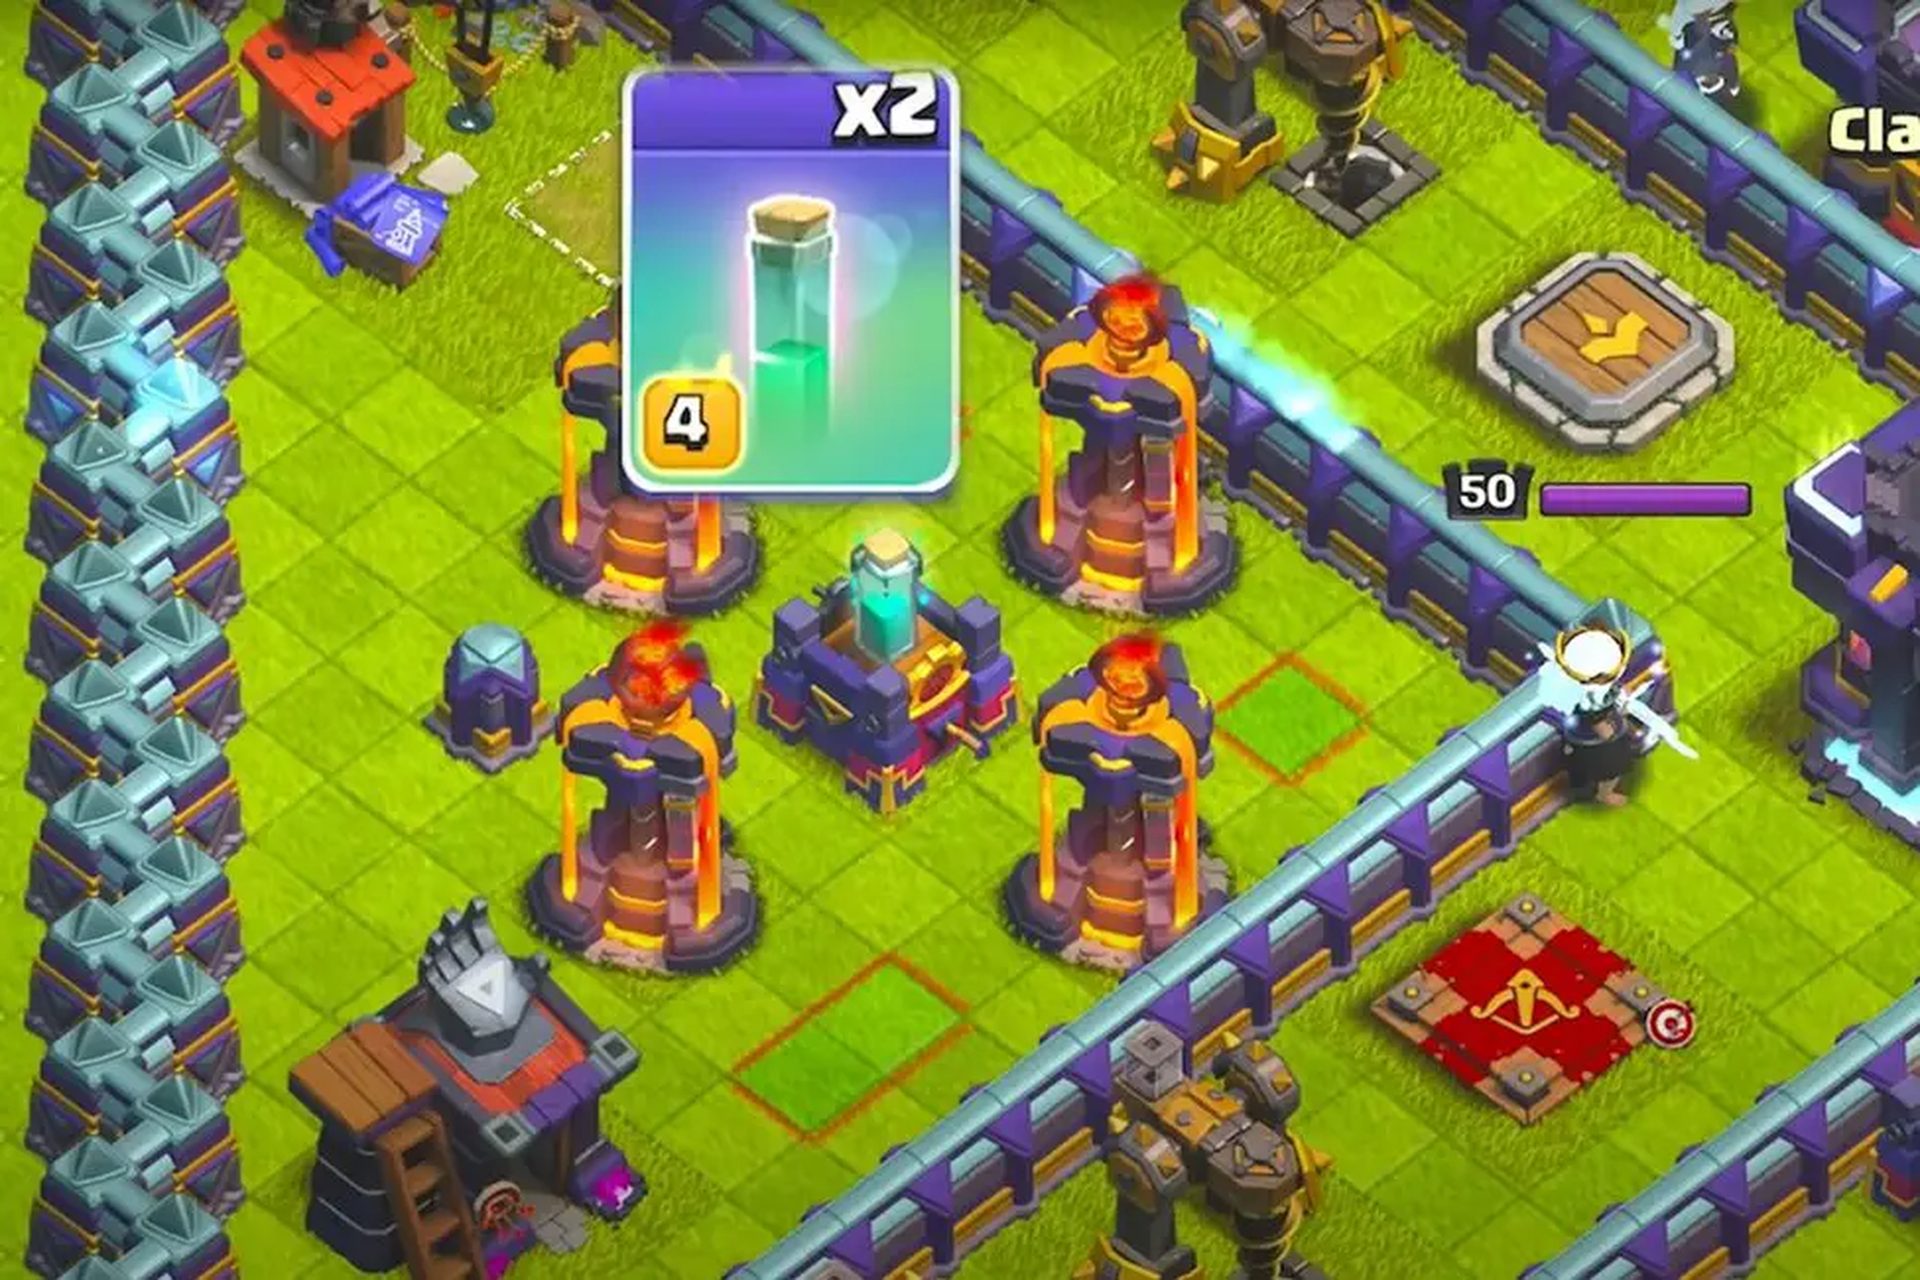 How to 3 star Magic Challenge CoC: Clash of Clans Town Hall 15 challenges 